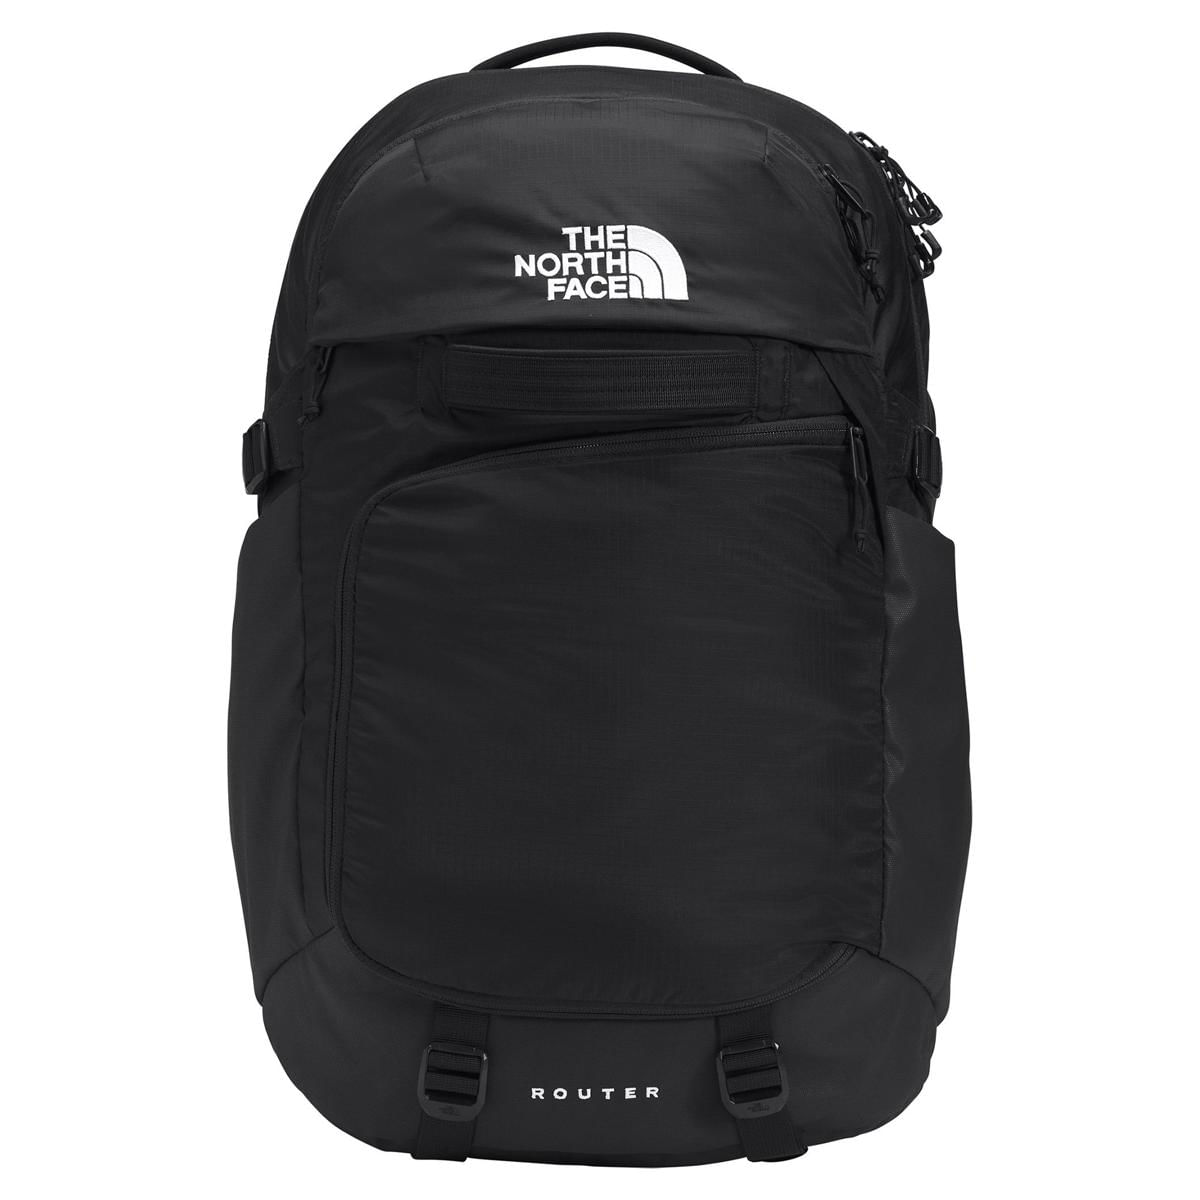 The North Face ROUTER BLACK - Ski Jackets and Gear, Winter Coats, Running,  Tennis, Soccer, and more from Top Brands - Paragon Sports